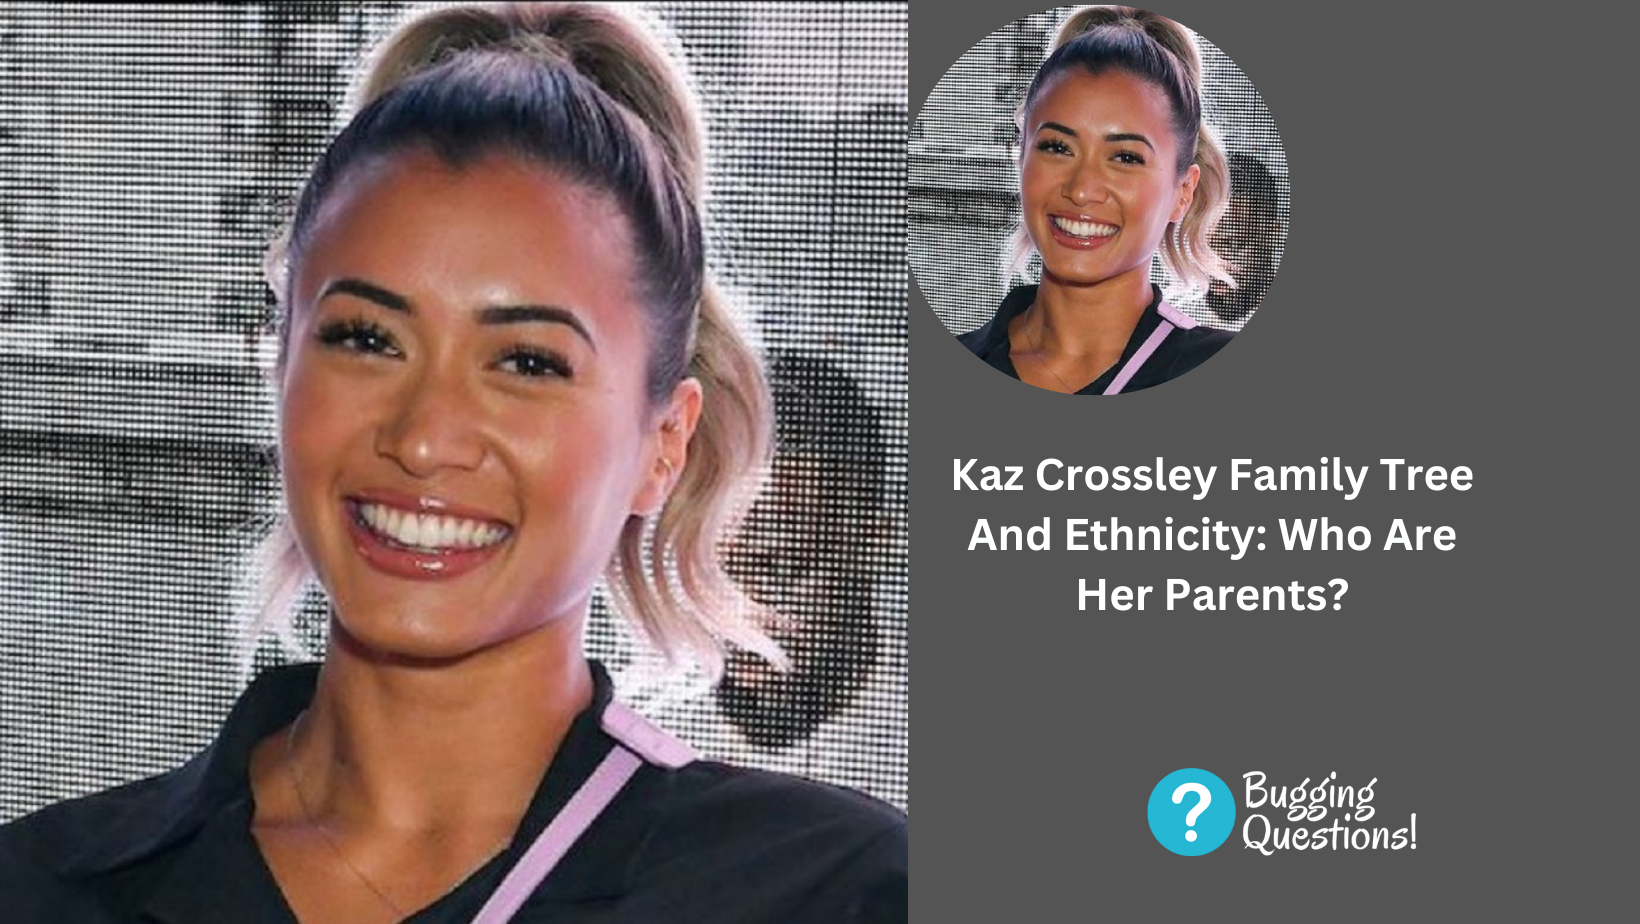 Kaz Crossley Family Tree And Ethnicity: Who Are Her Parents?